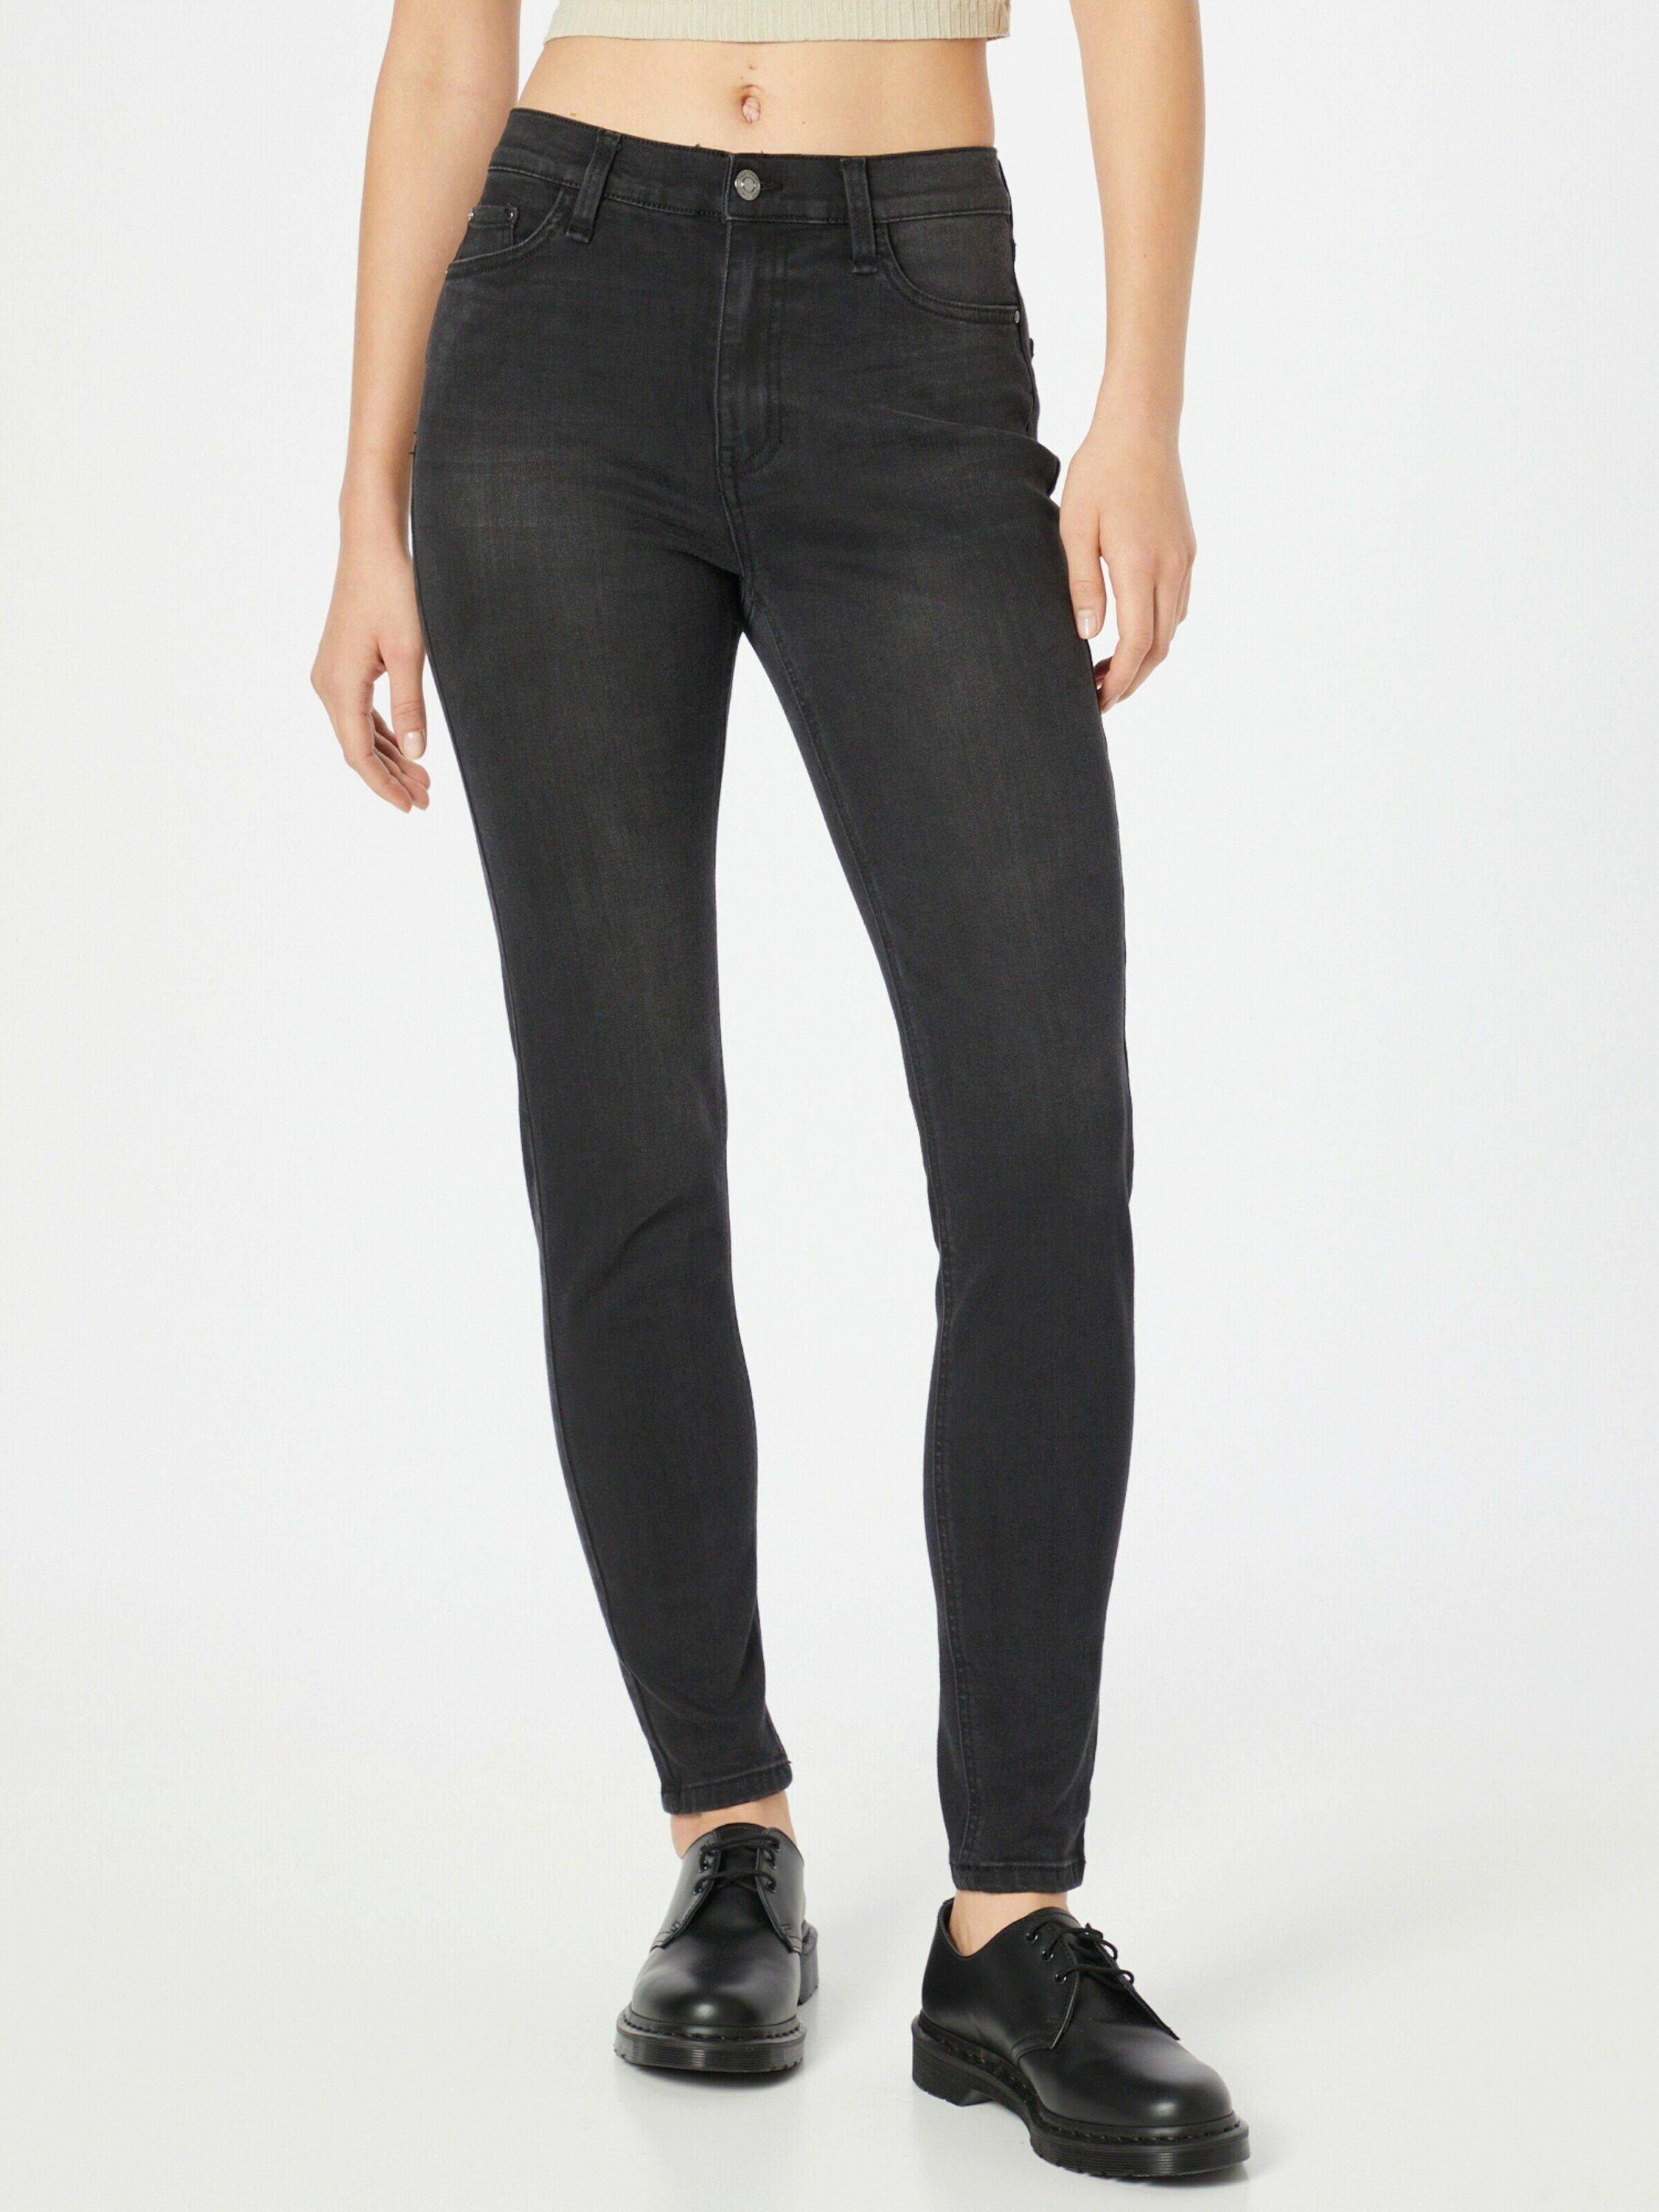 Damen Jeans FREEQUENT Skinny-fit-Jeans